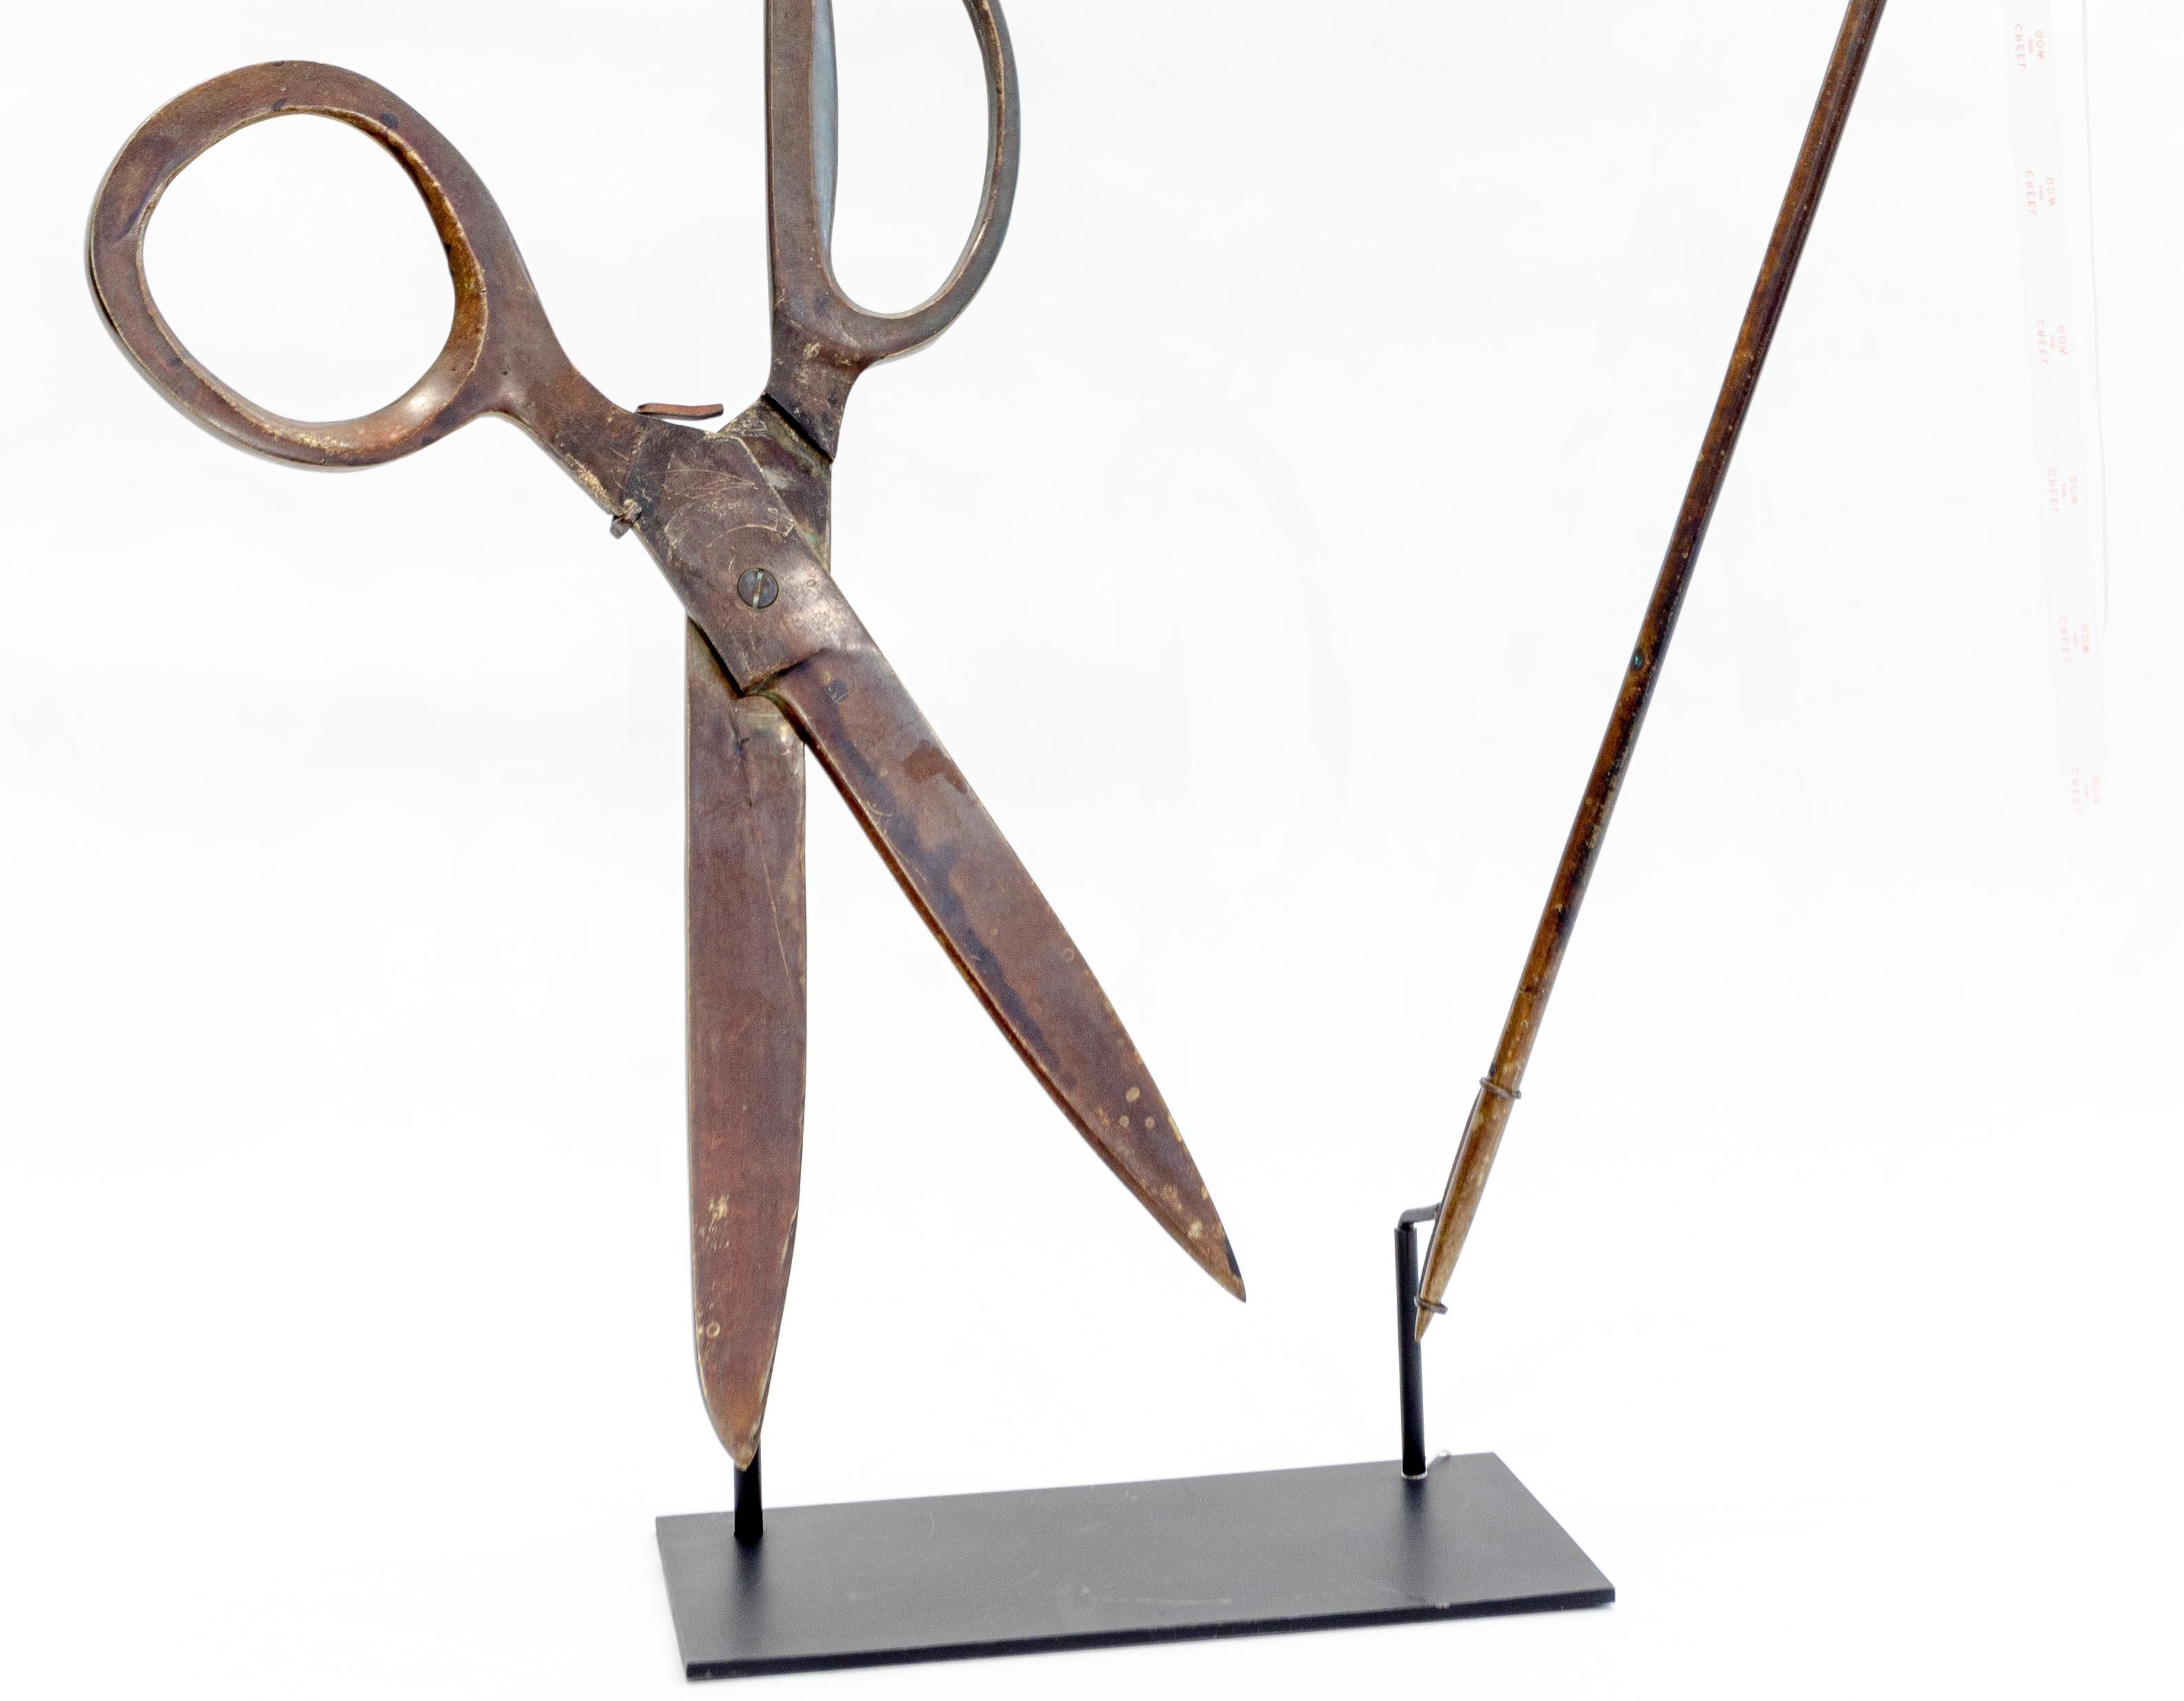 Brass scissors and needle trade sign with pivoting needle, 19th century. Measures: height 35”, length 28.5”, depth 10”.
 